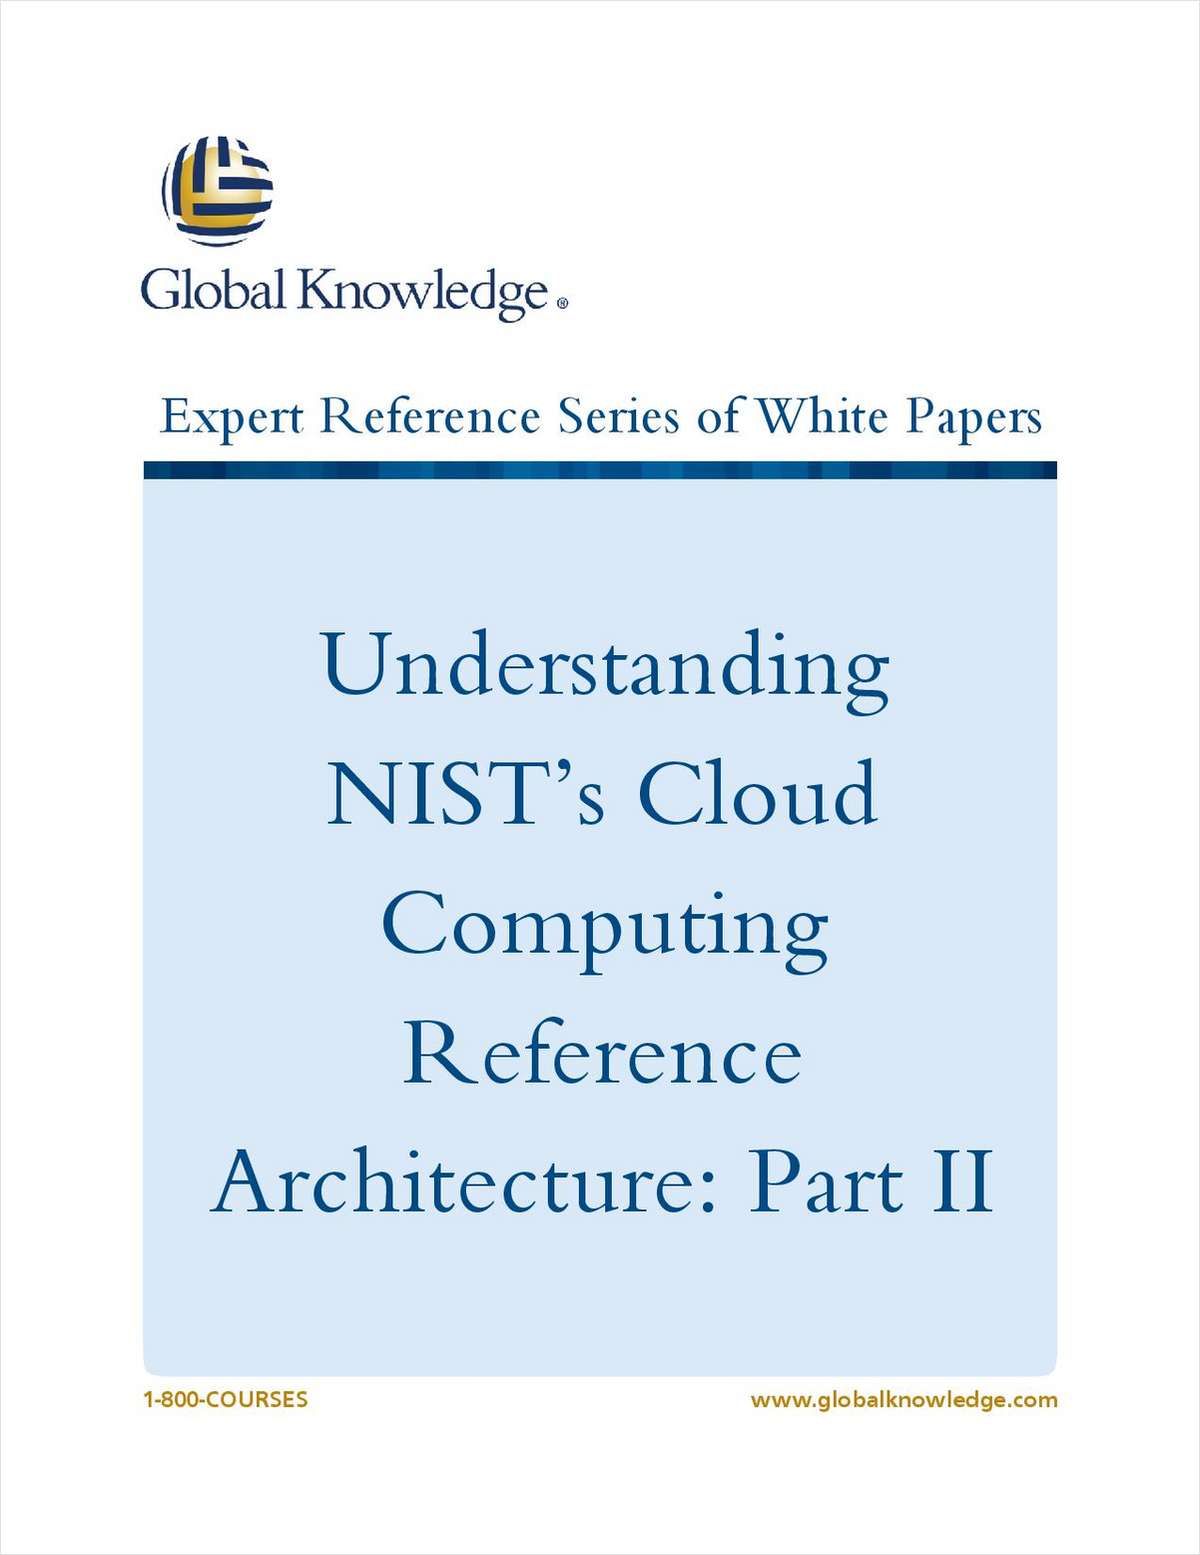 Understanding NIST's Cloud Computing Reference Architecture: Part II